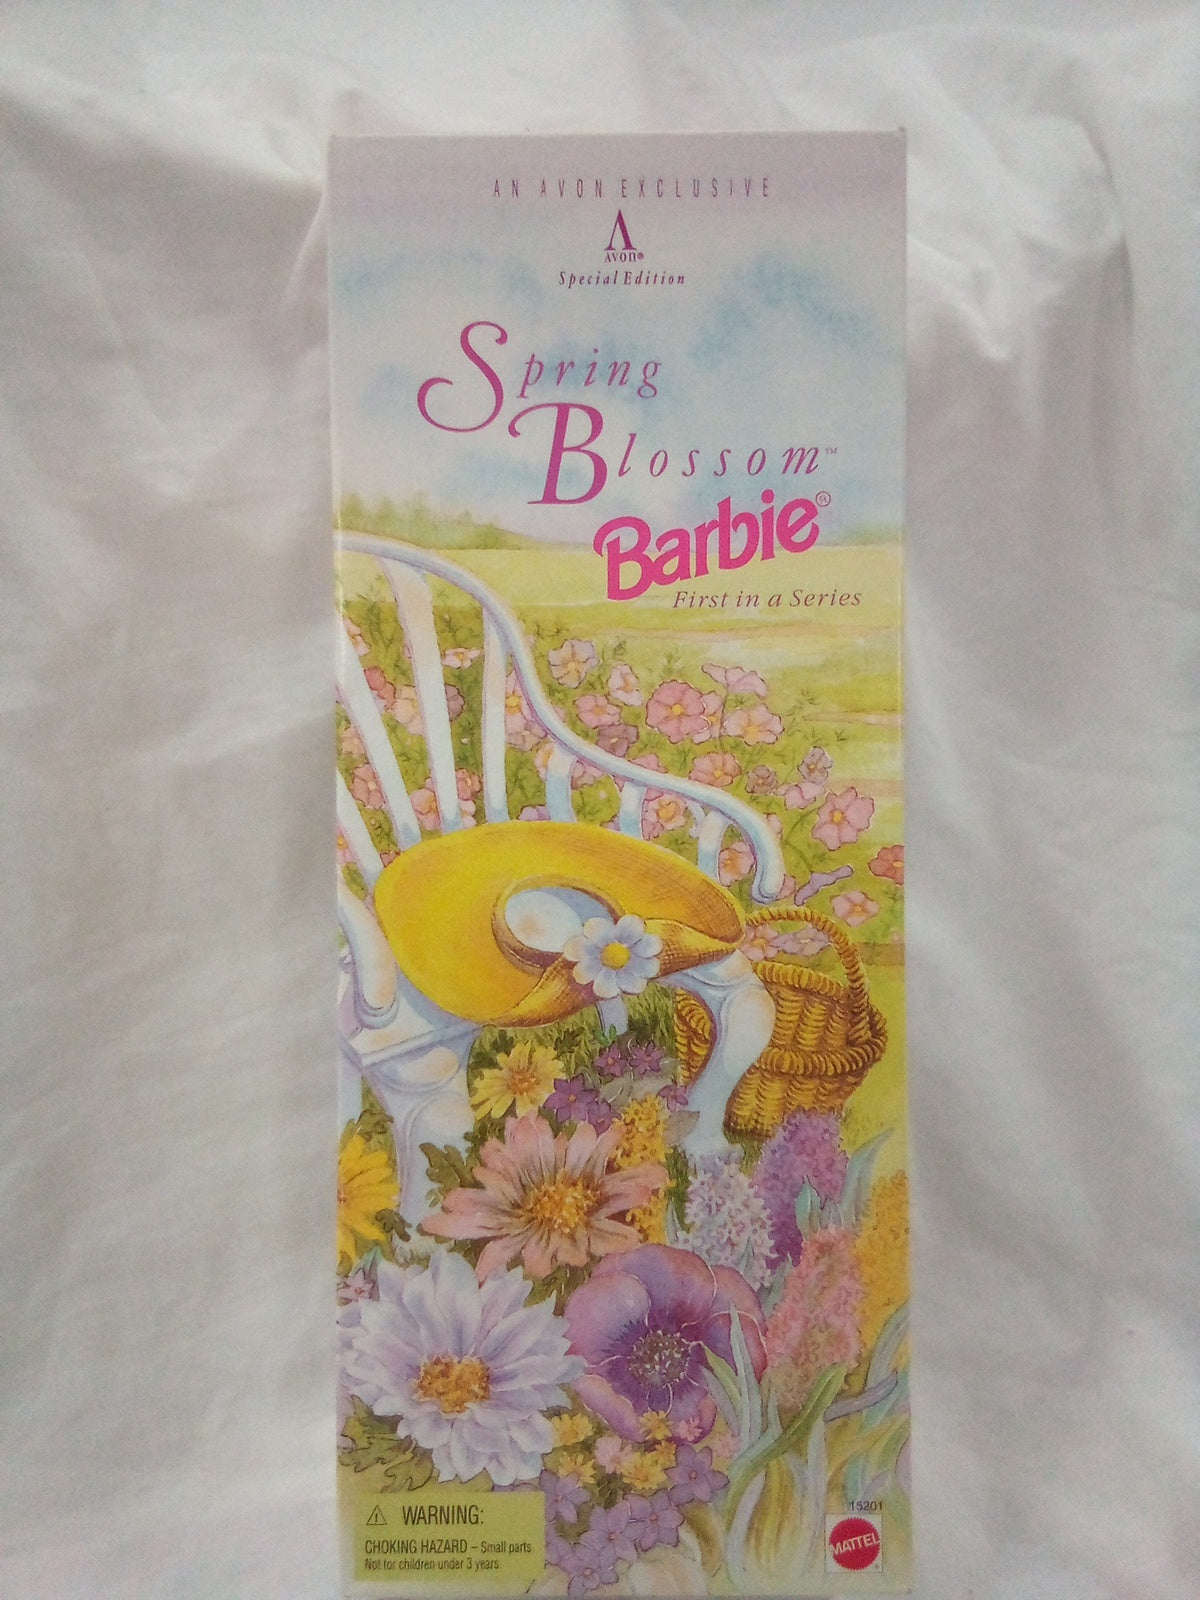 BARBIE "Spring blossom Barbie" ;first in a series; special edition